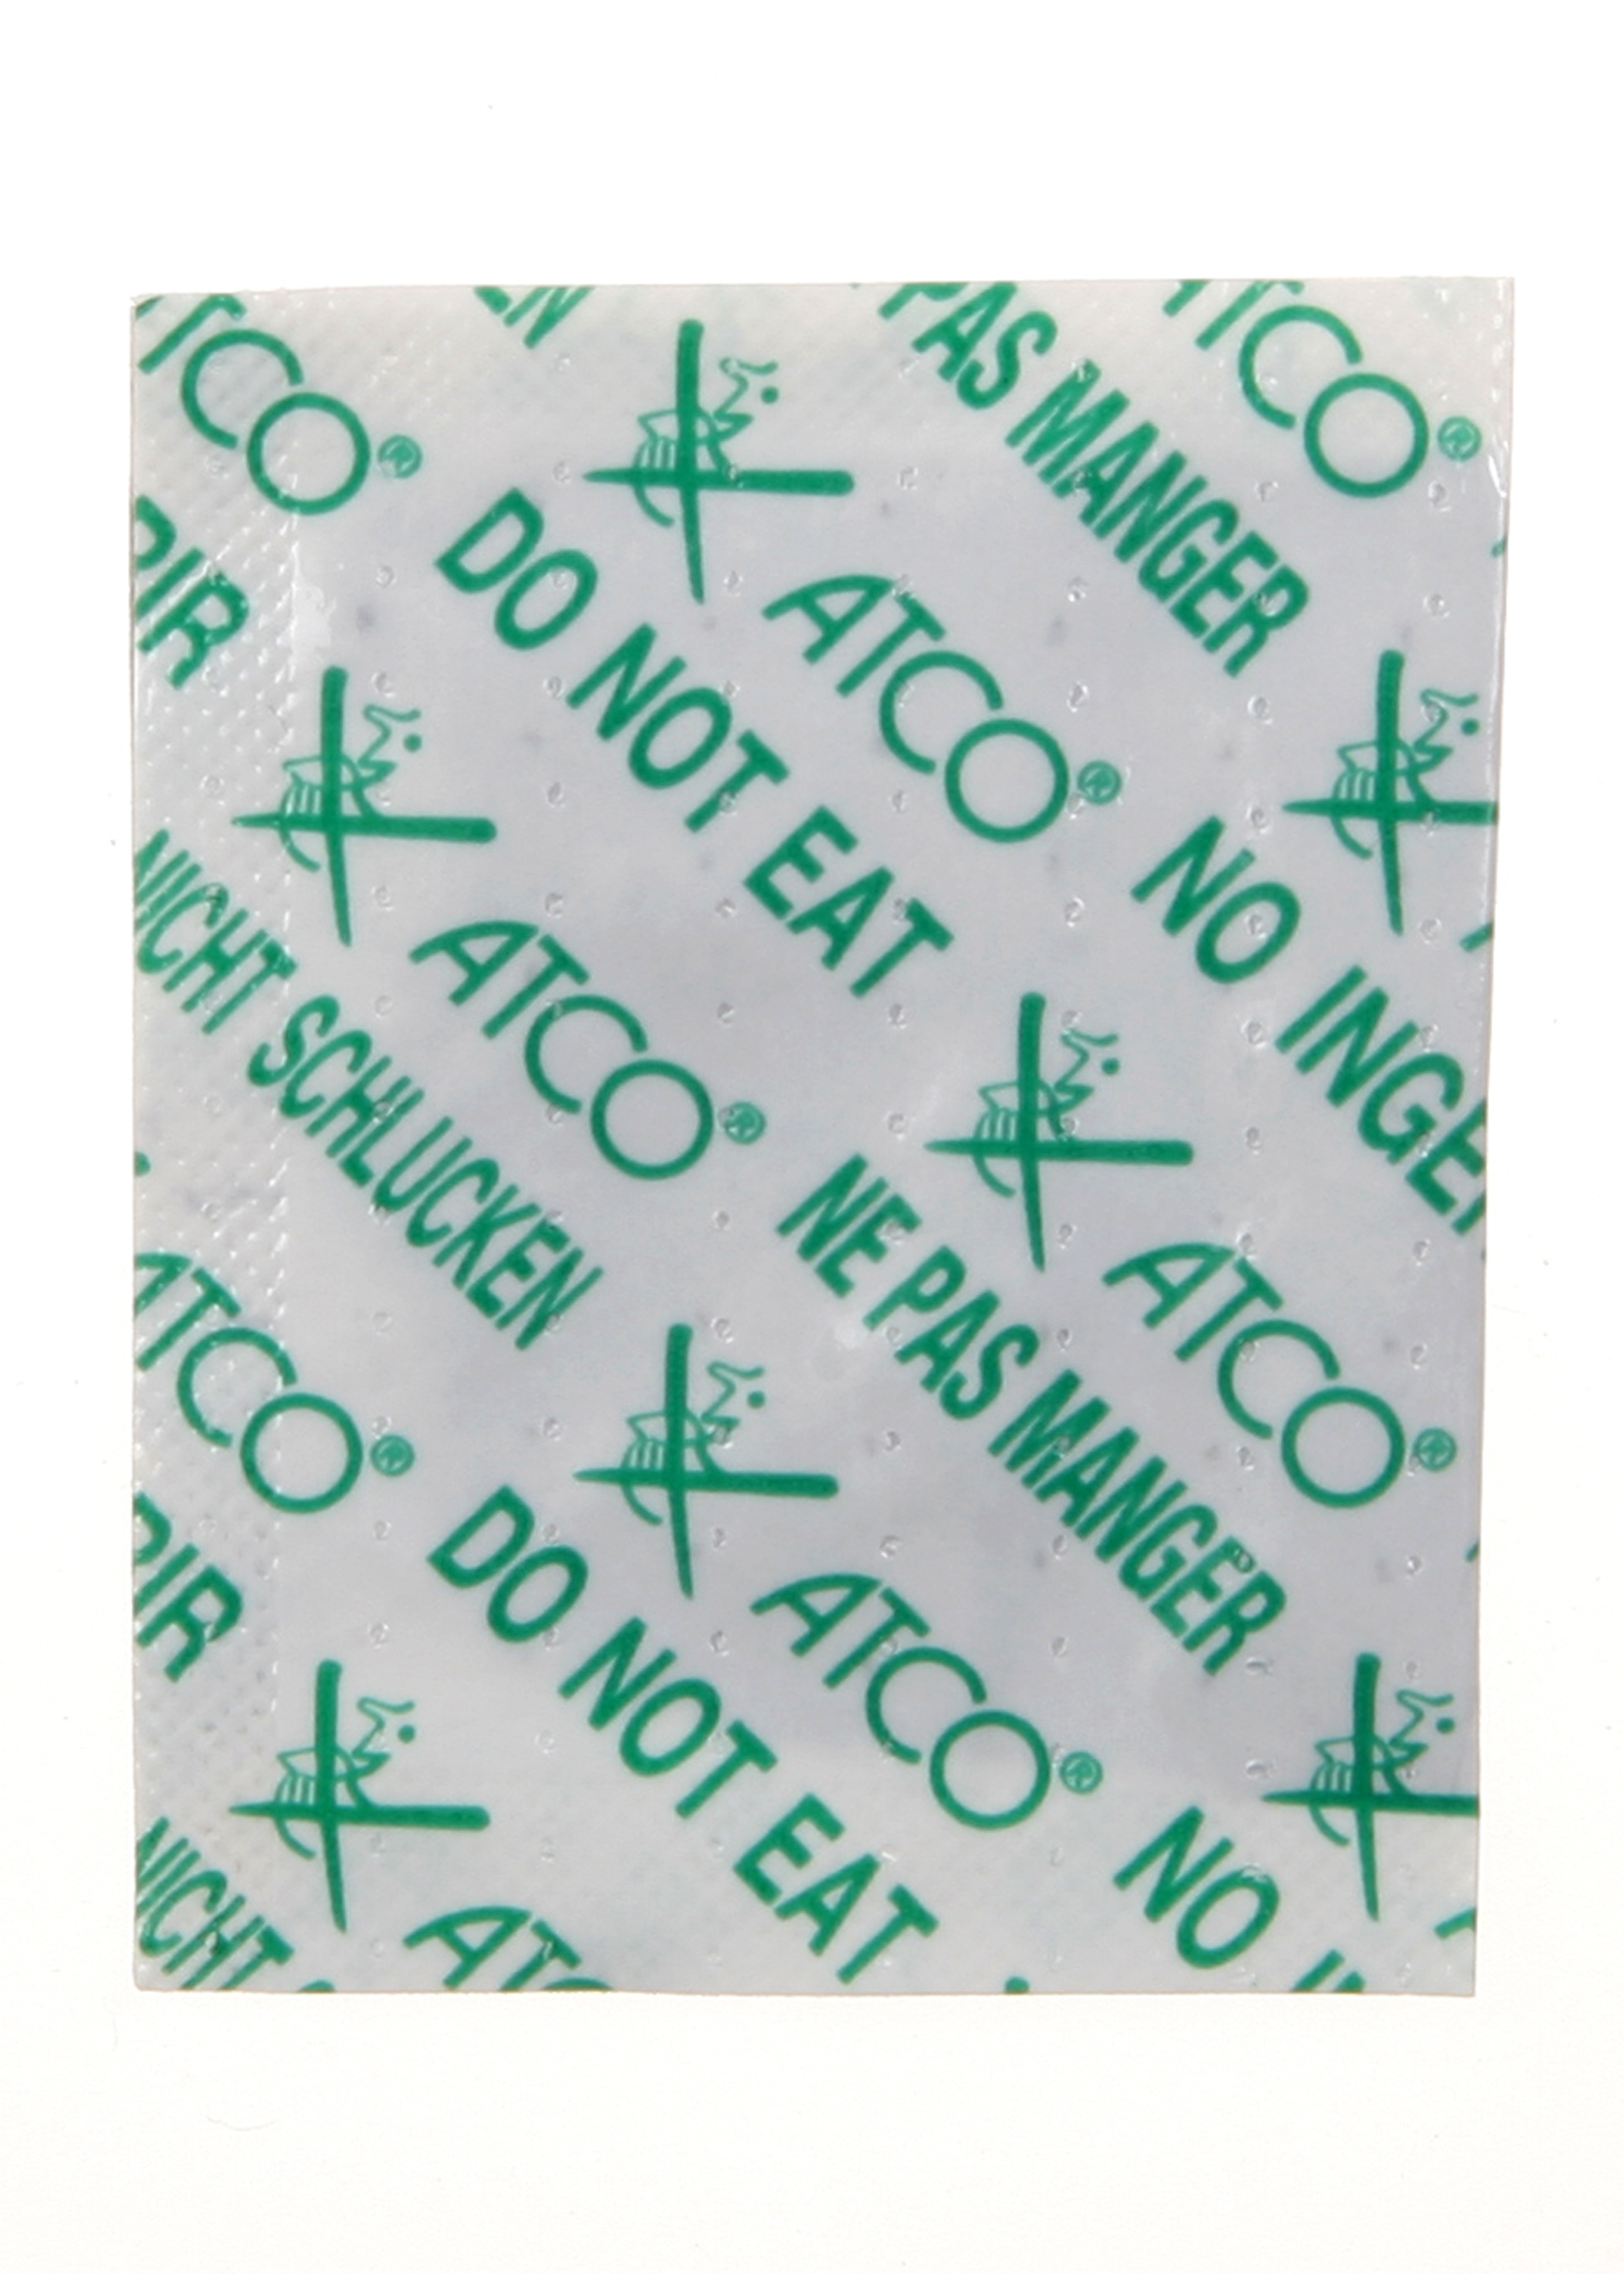 ATCO Oxygen Absorber DSP200